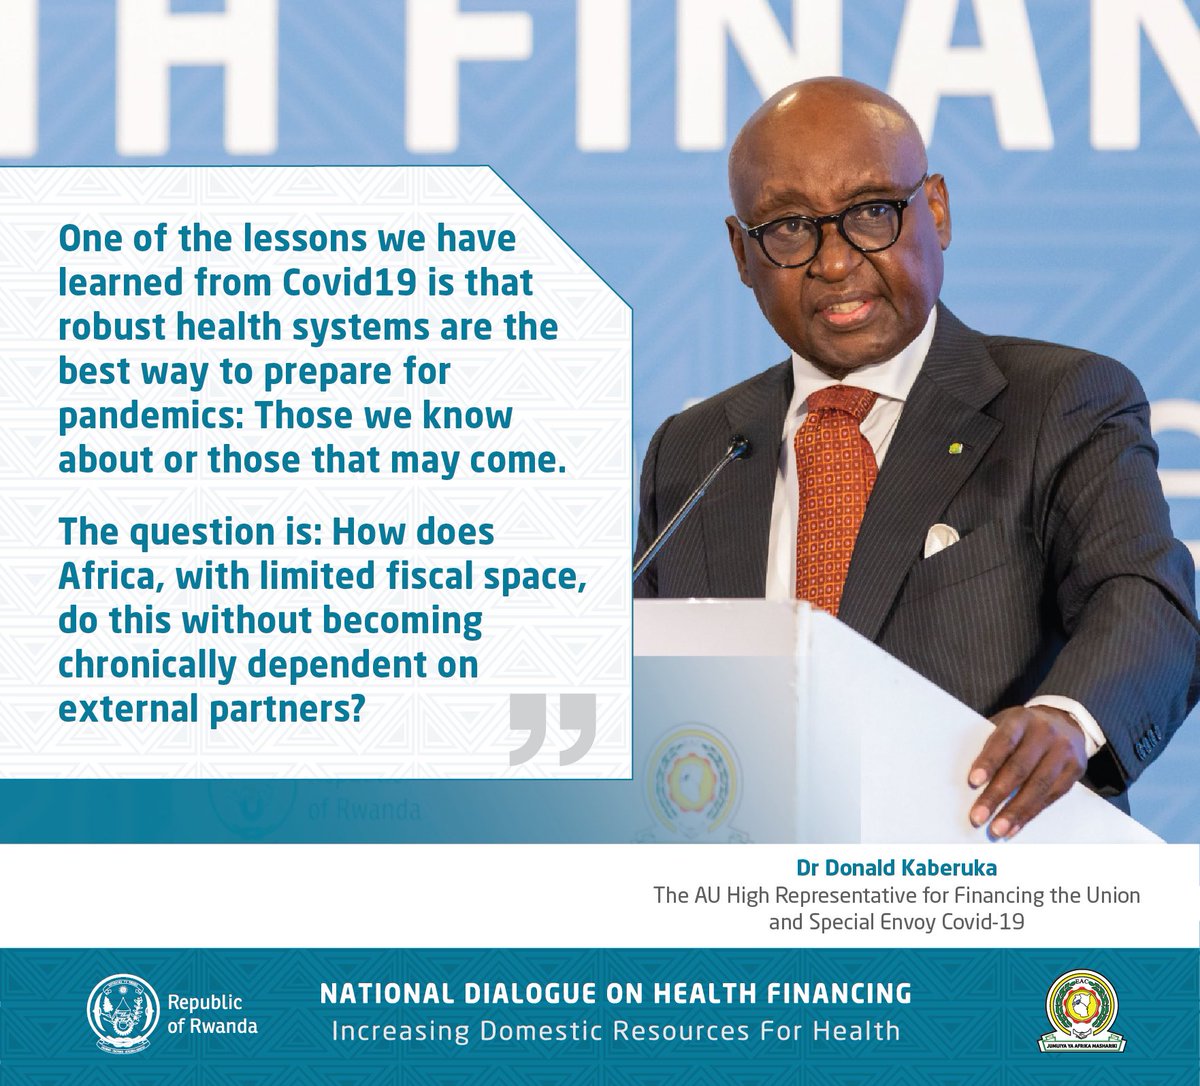 Robust health systems are the best way to prepare for and respond to pandemics. #HealthFinancing Dr @DonaldKaberuka